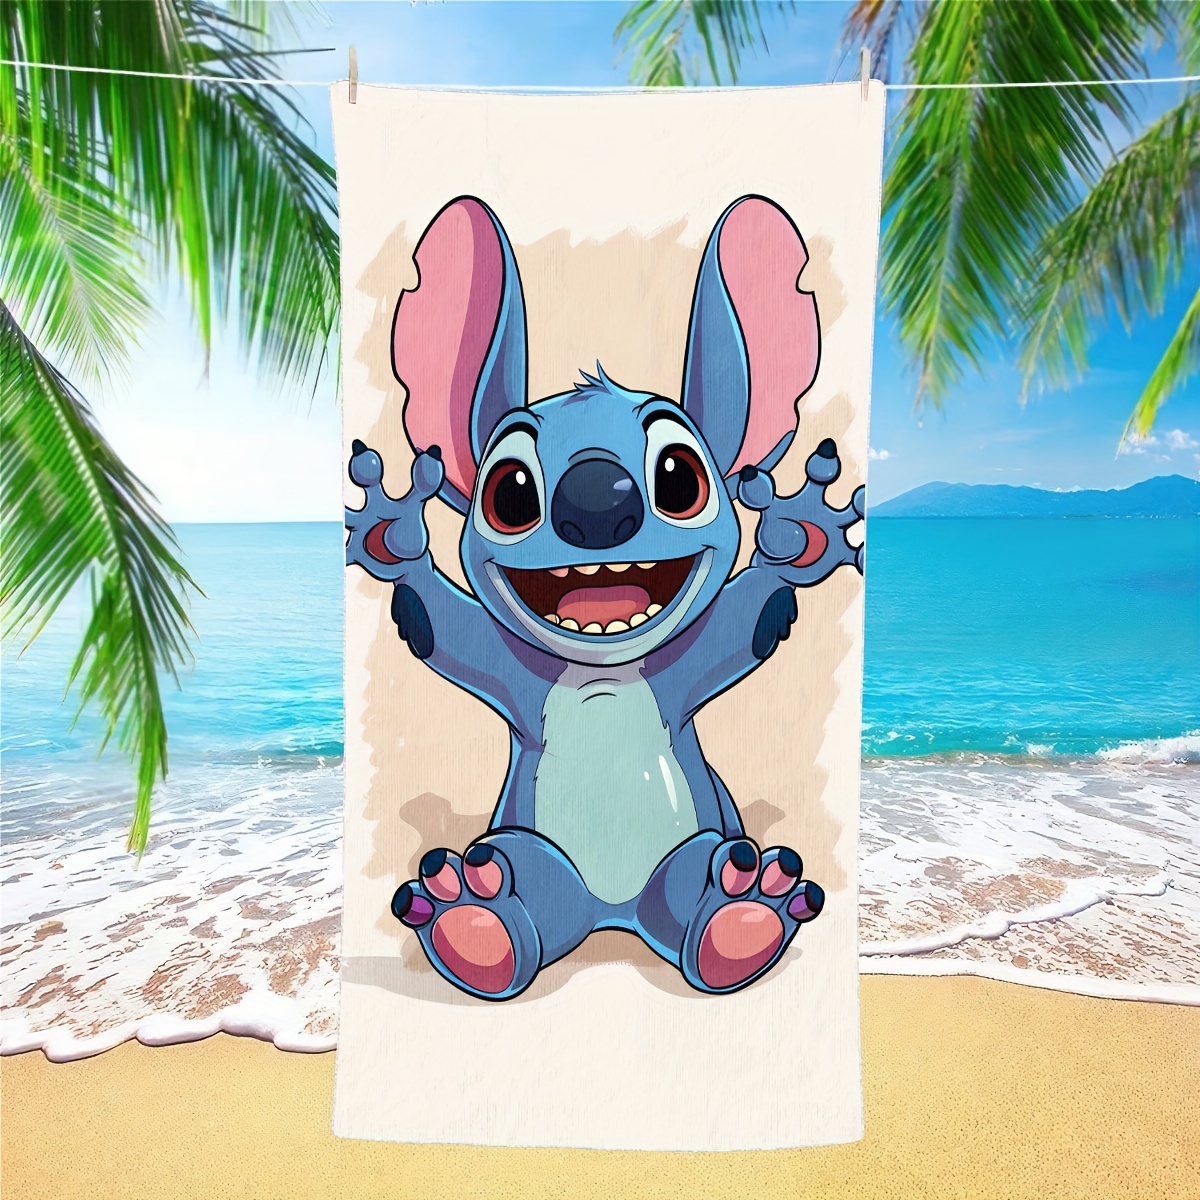 

Stitch-themed Extra Large Beach Towel - Super Absorbent, Quick Dry, Soft & Sand-free For Pool, Swim, Bath, Travel & Camping